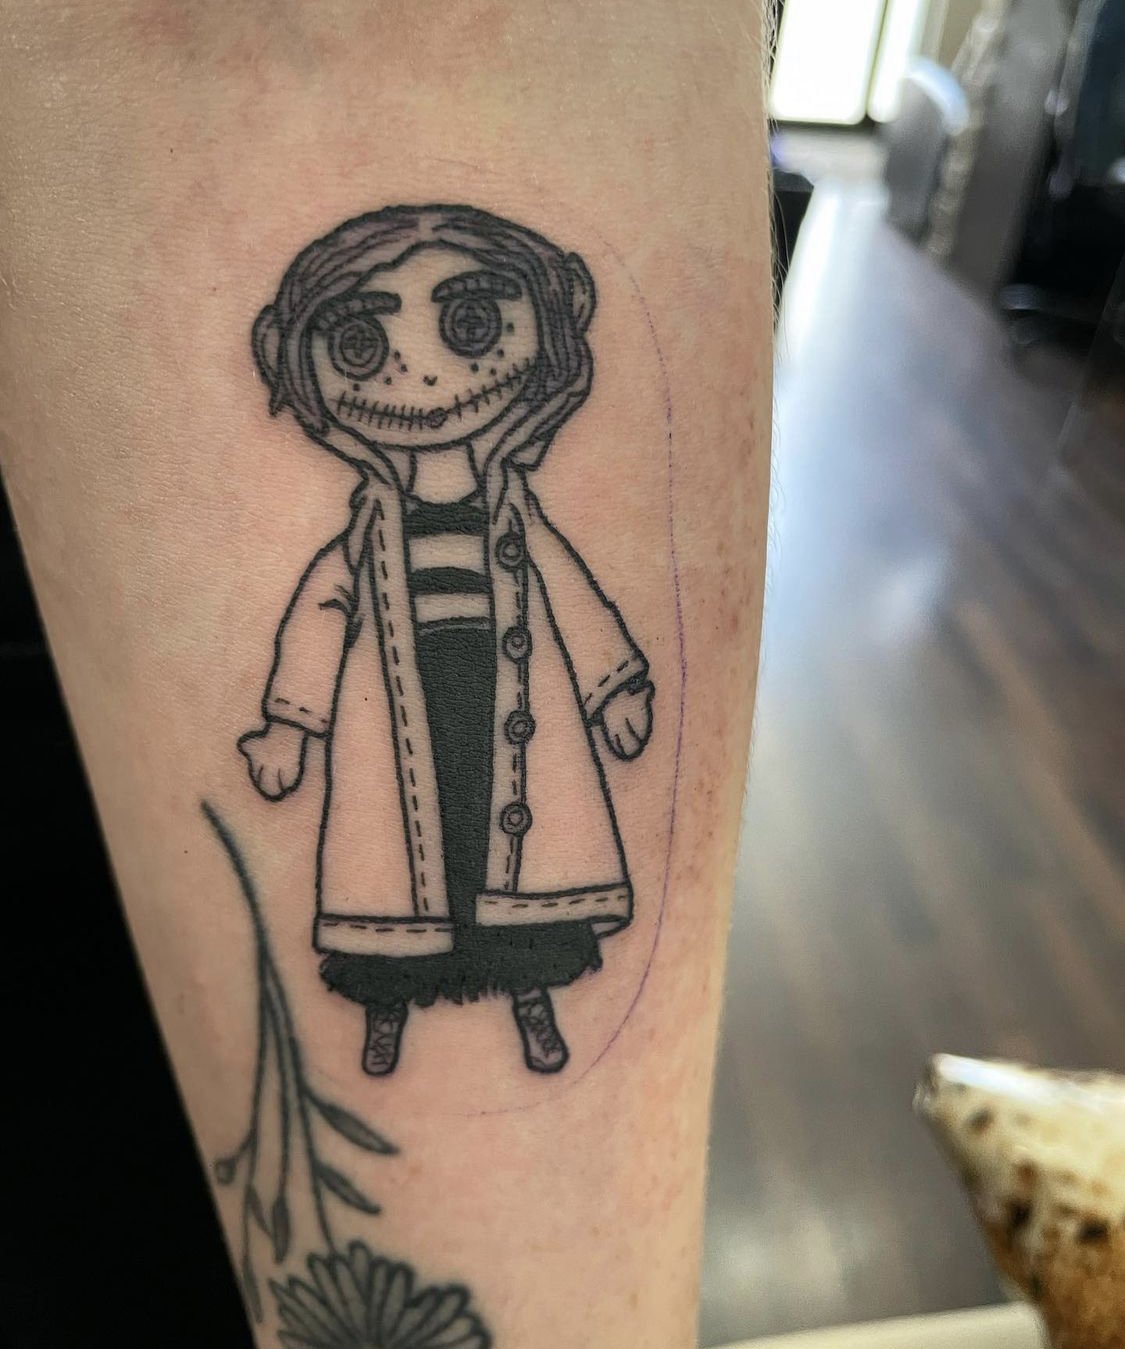 211 Likes 6 Comments  Samantha Rose Art blackroseart17 on Instagram  This Coraline Doll was so much fun to design  Than  Rose art Coraline  doll Tattoos